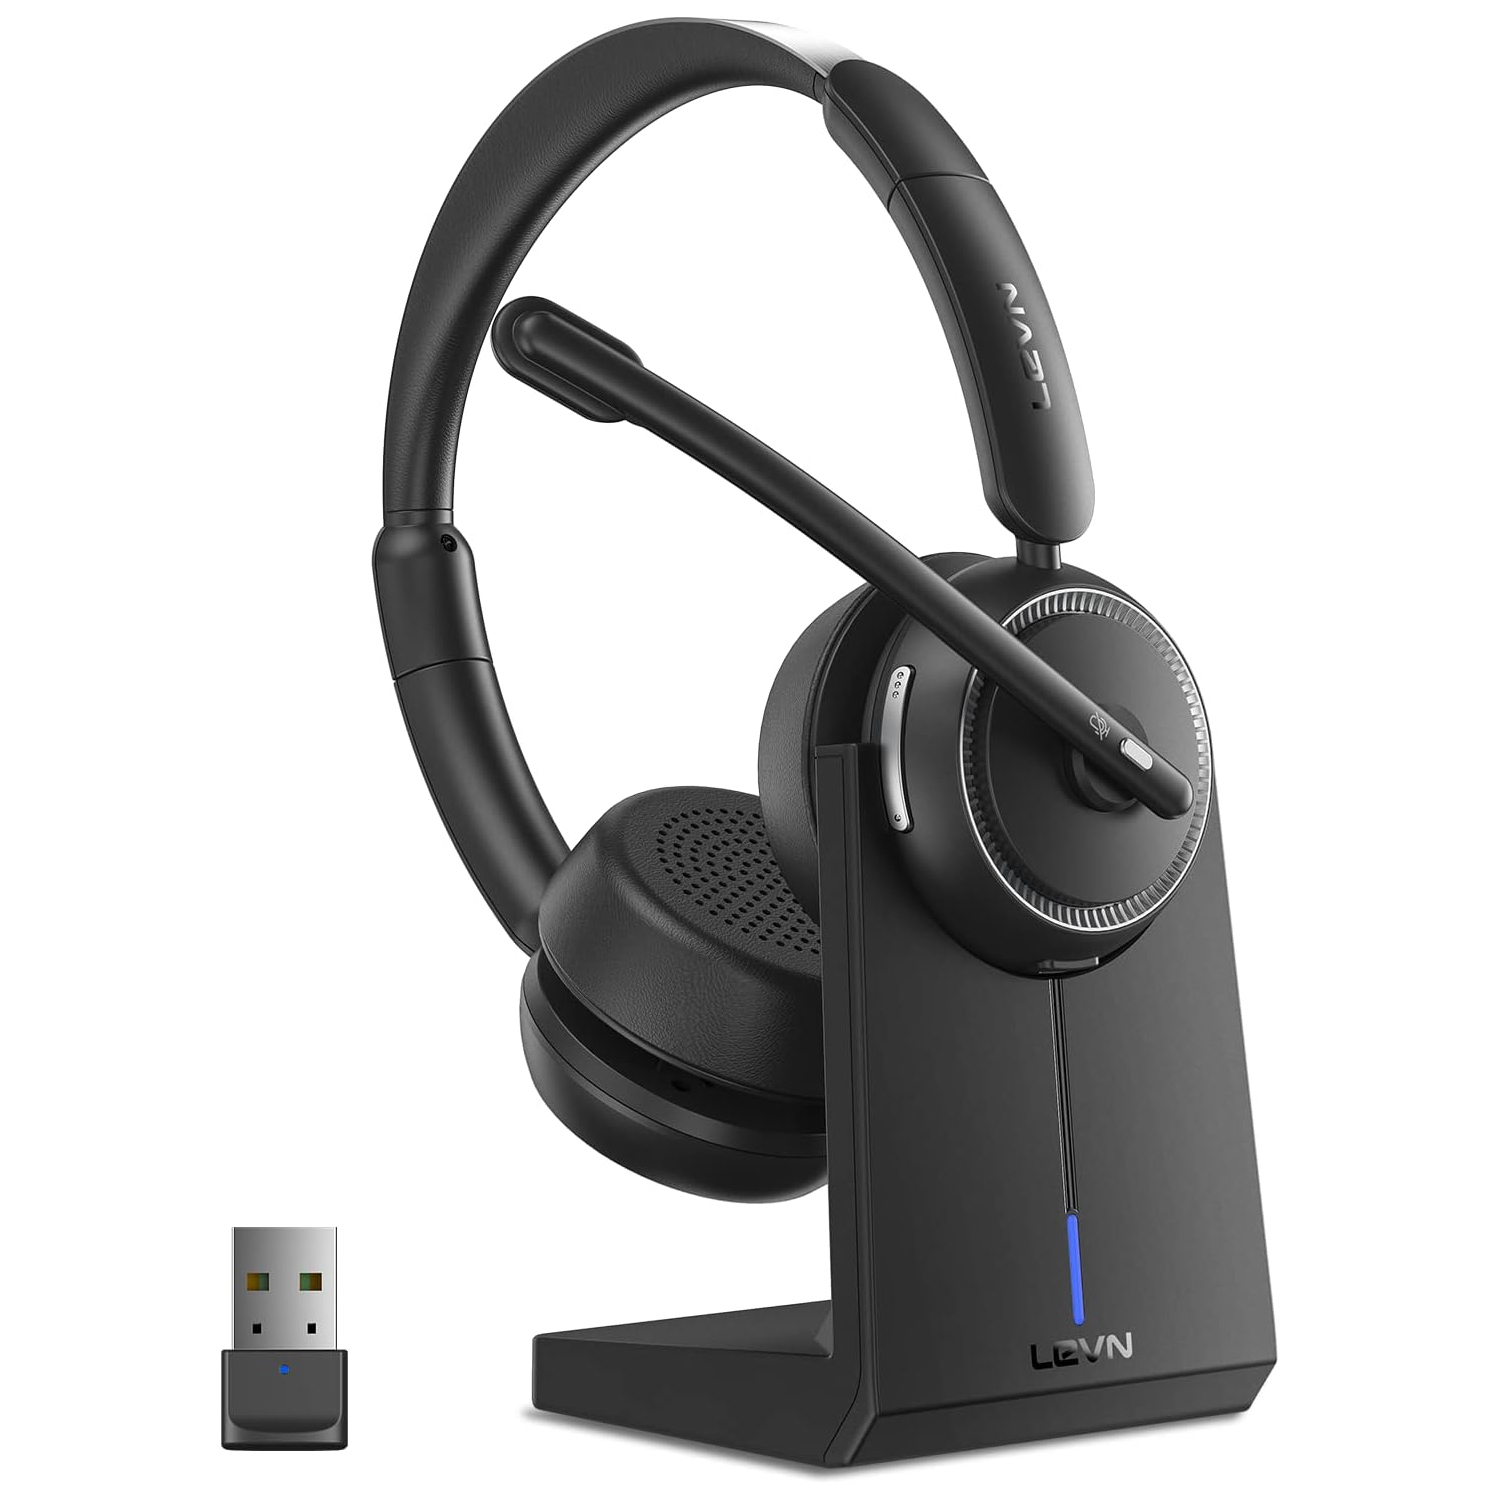 LEVN Wireless Headset, Bluetooth Headset with Noise Canceling Microphone & Charging Base, 65 Hrs Working Time 2.4G Headset with Microphone for PC/Laptop/Computer